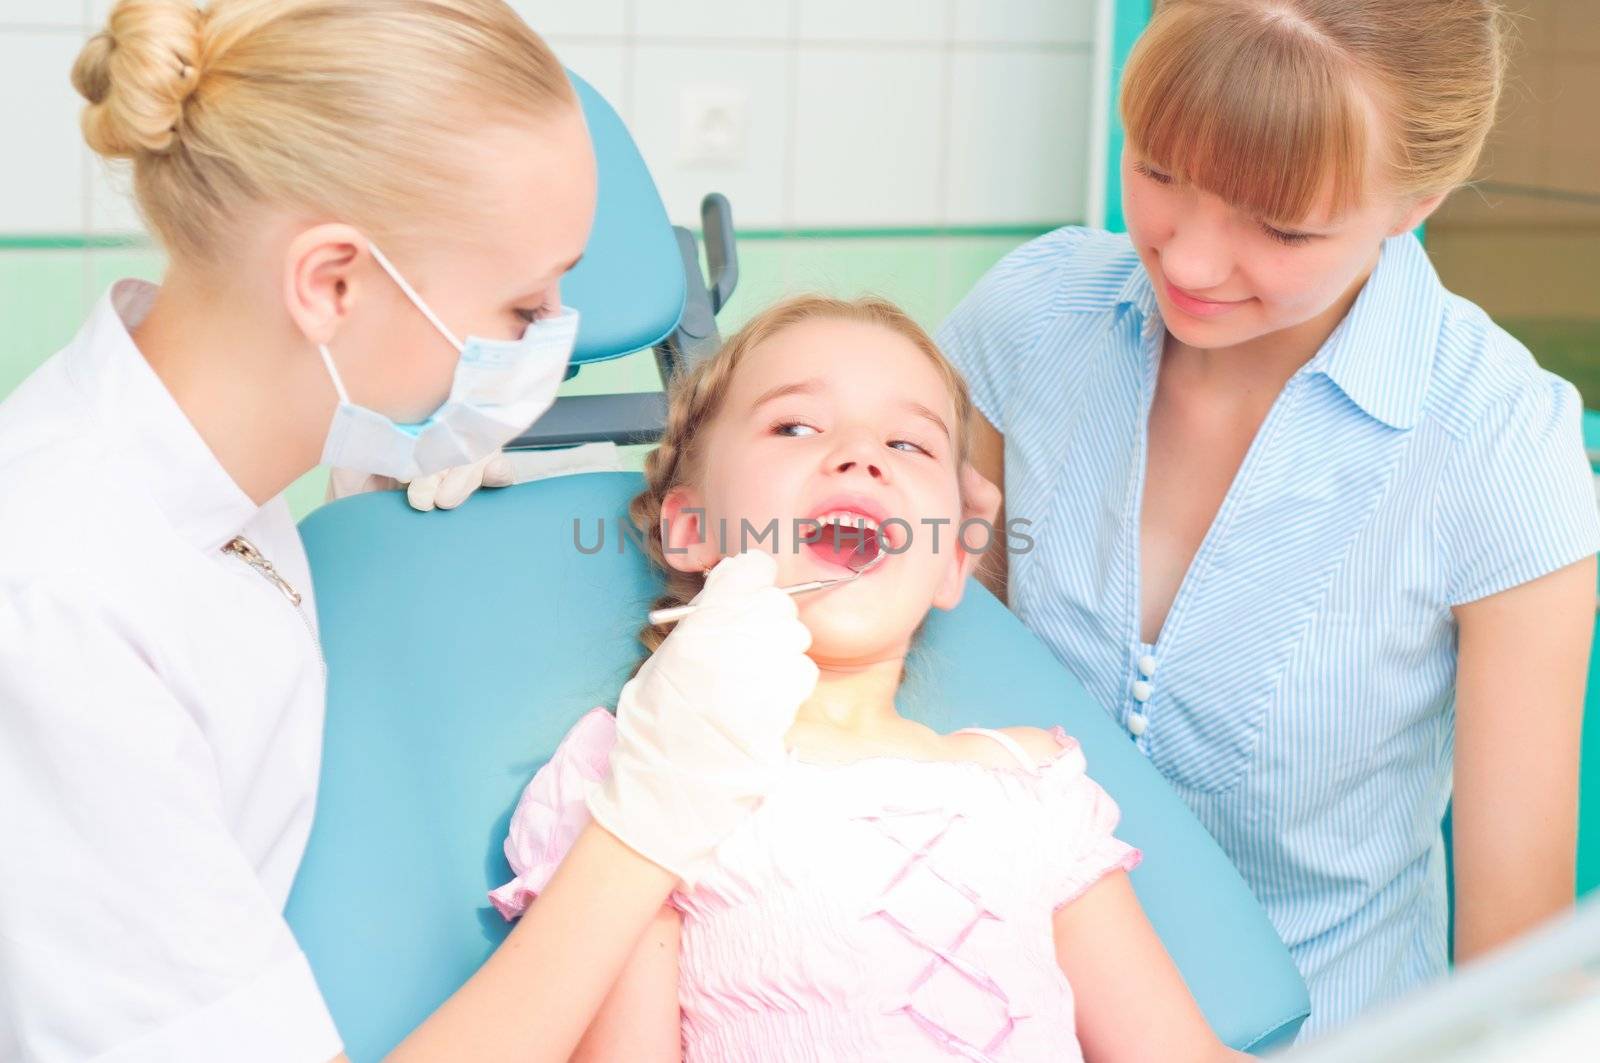 female dentists examines a child, my mother was sitting beside him and soothes baby